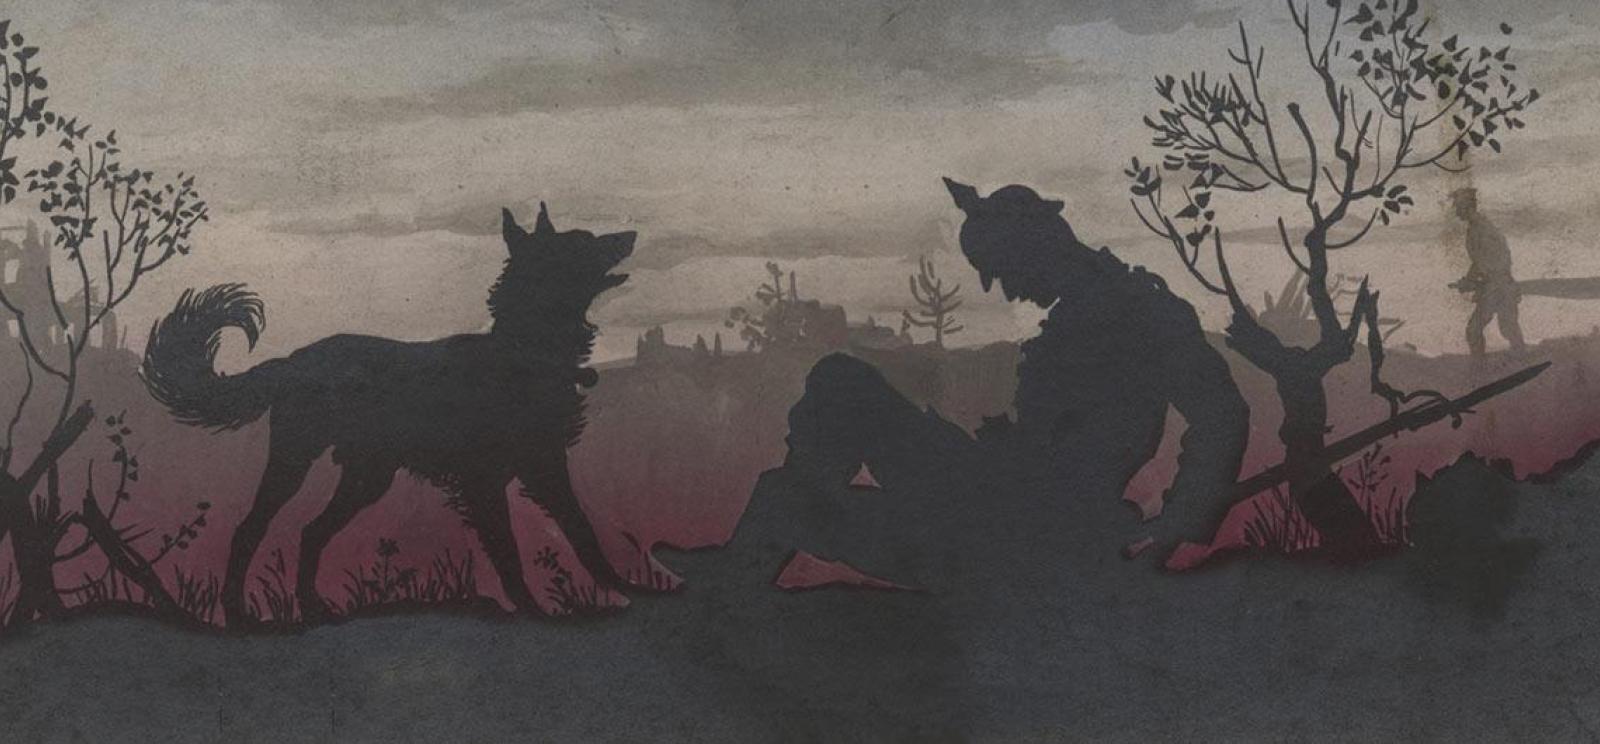 Dogs in WWI | National WWI Museum and Memorial